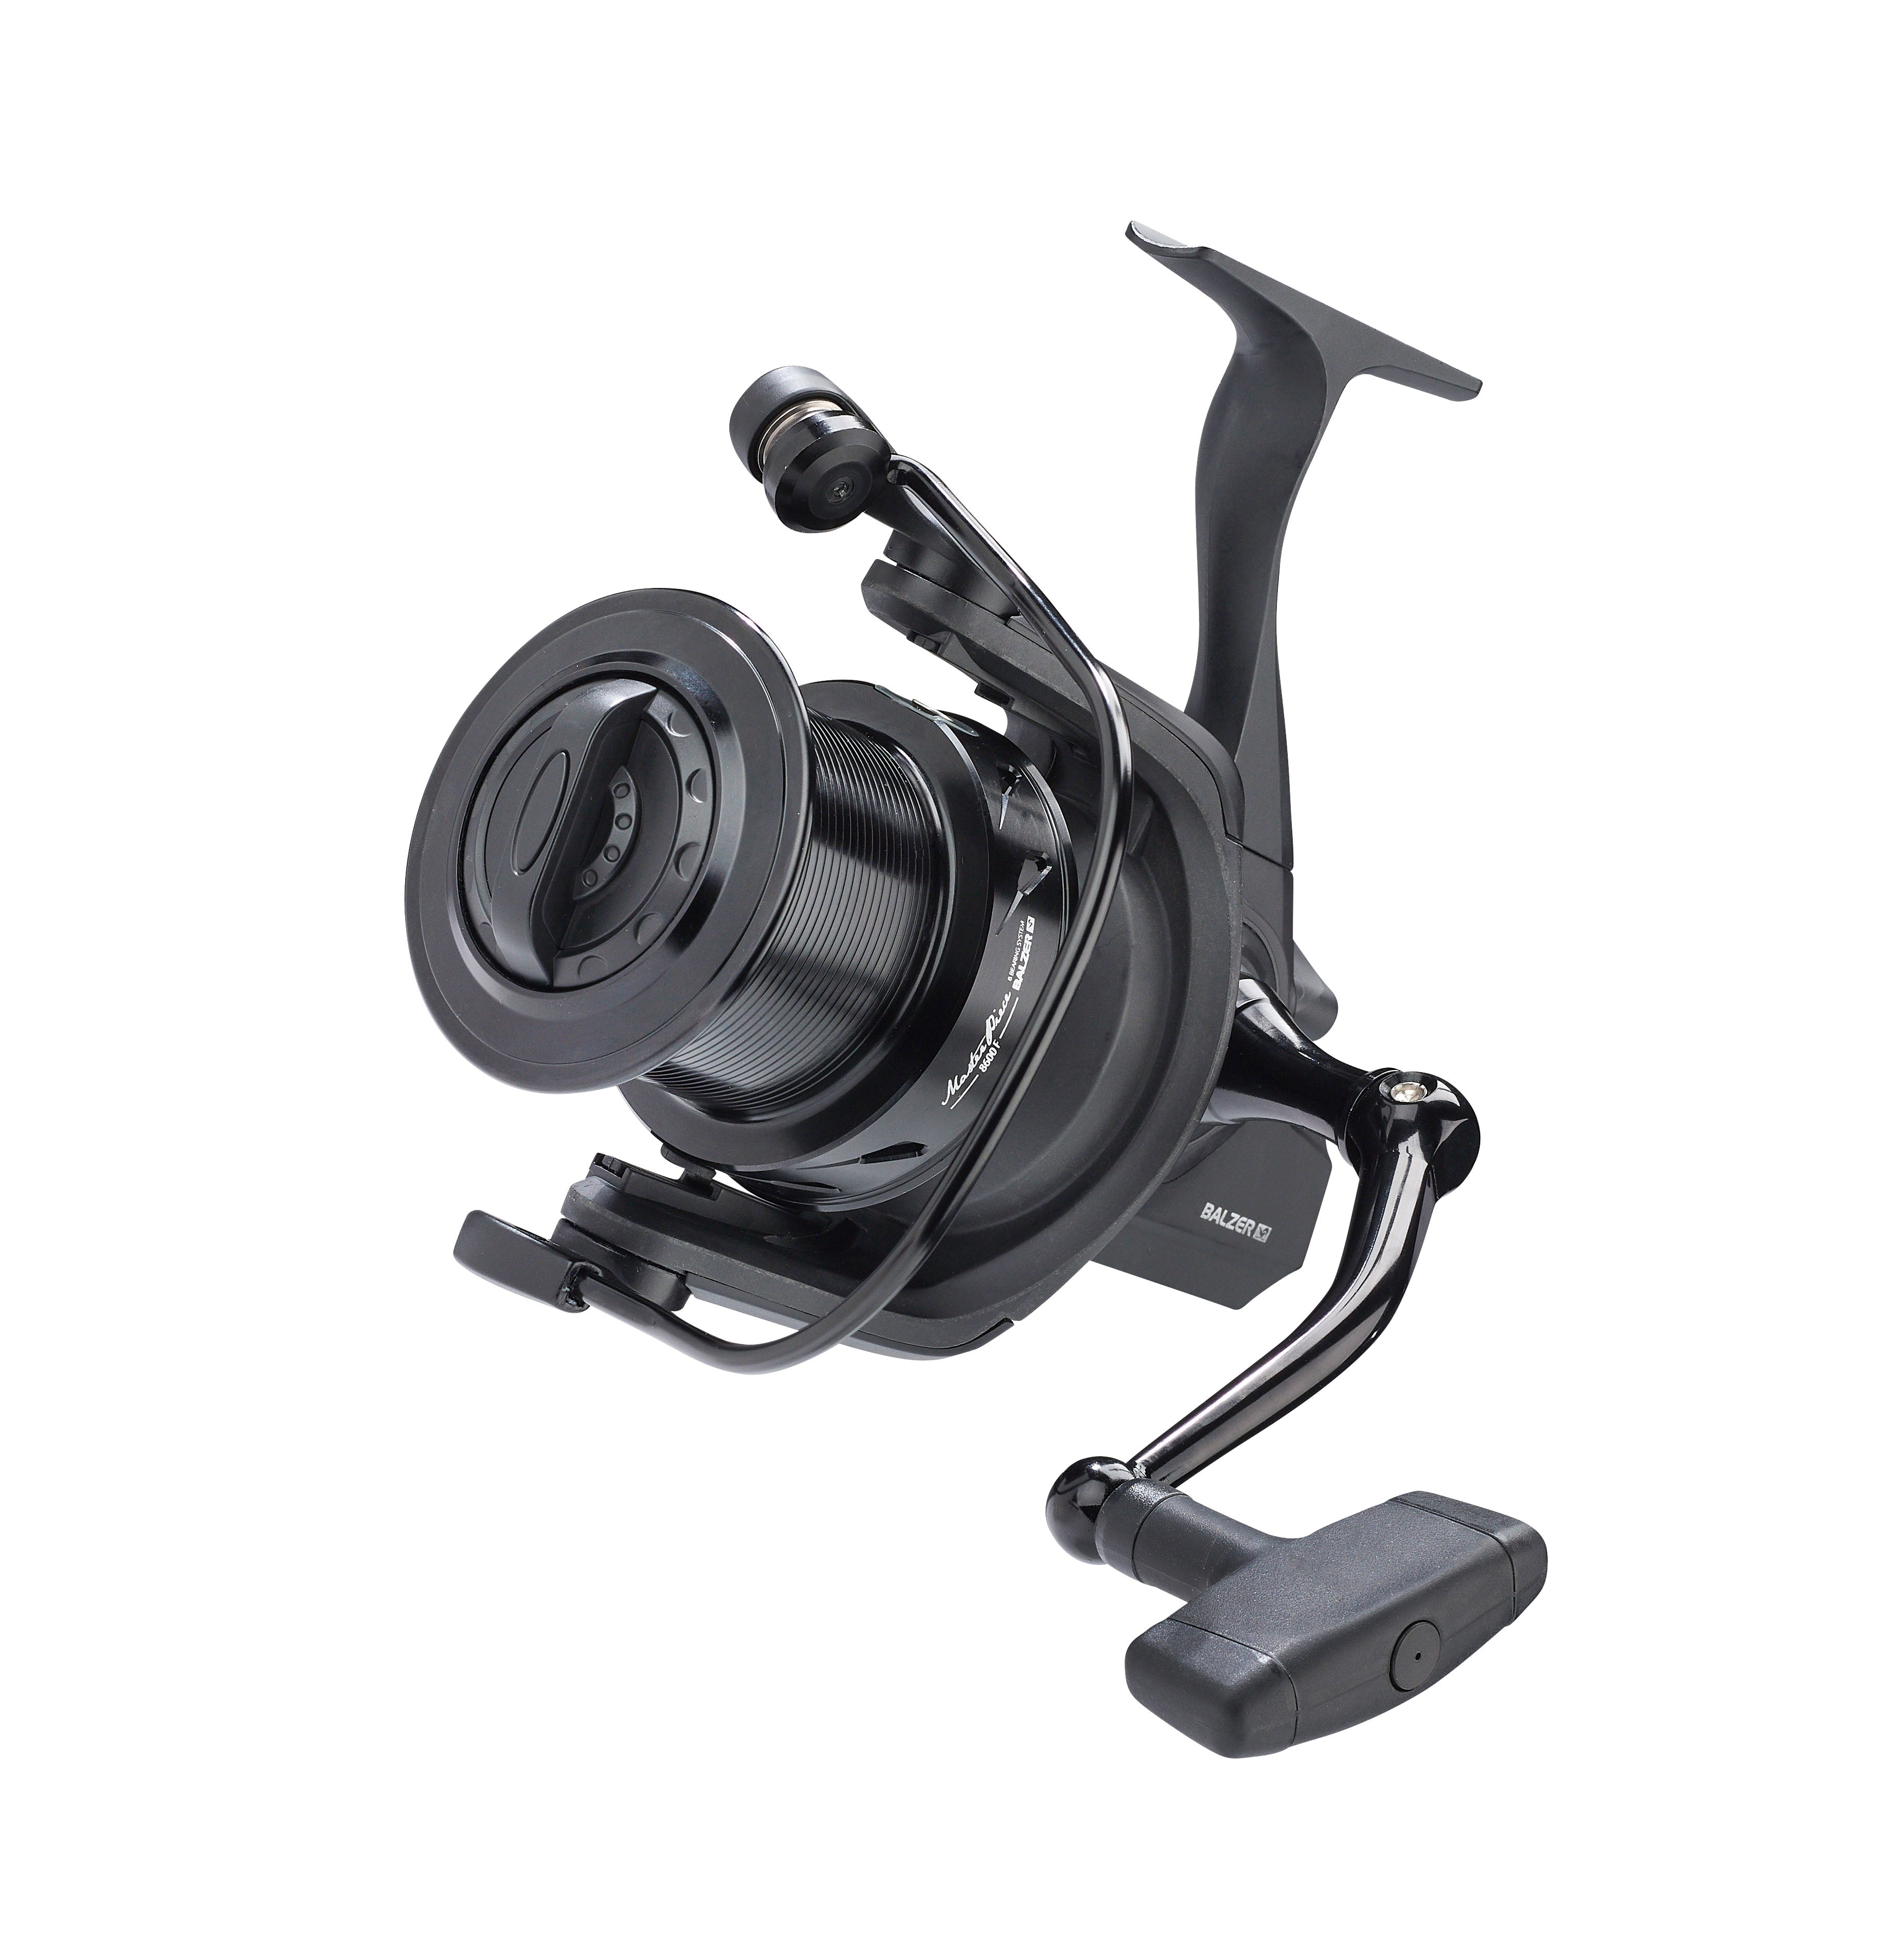  Fishing Rod Combo 7-axle Spinning Reel and Fishing Rod